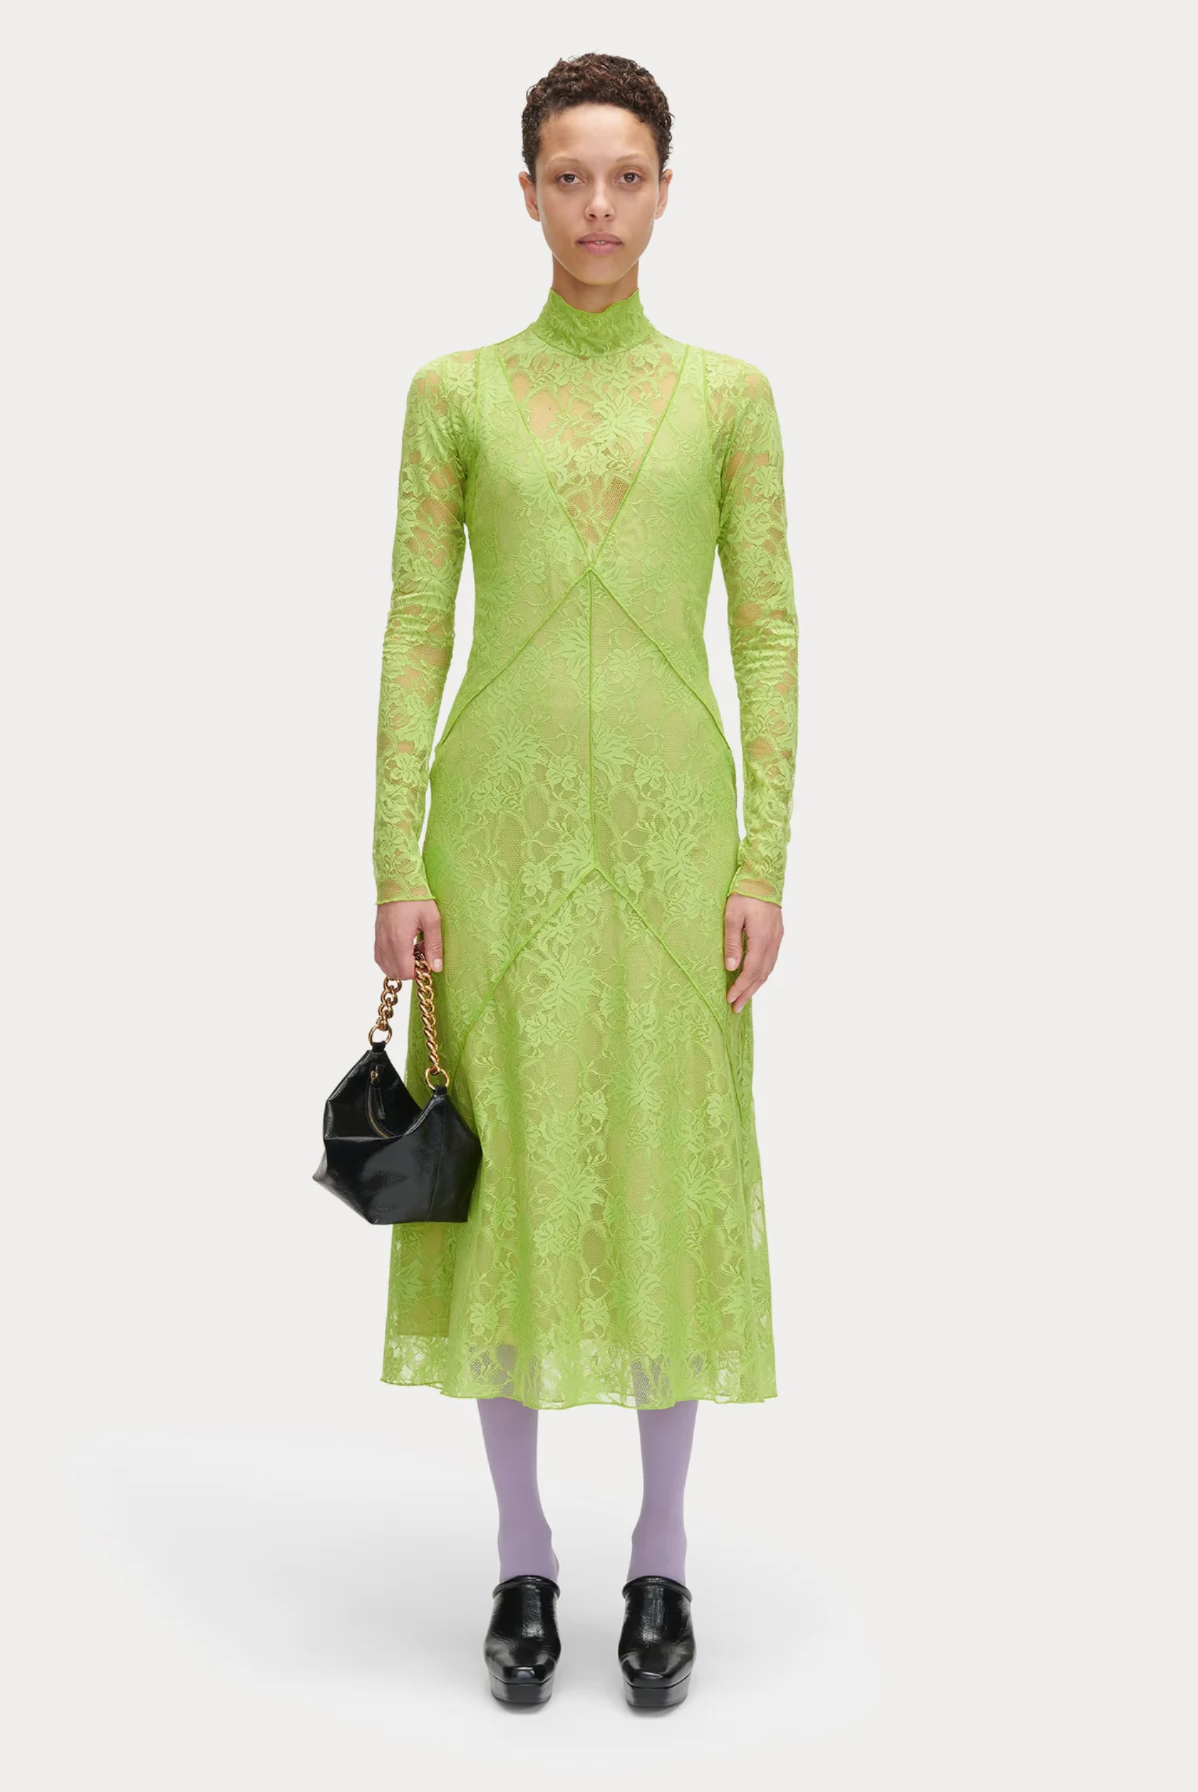 Demil Dress in Lime Slip Lace by Rachel Comey